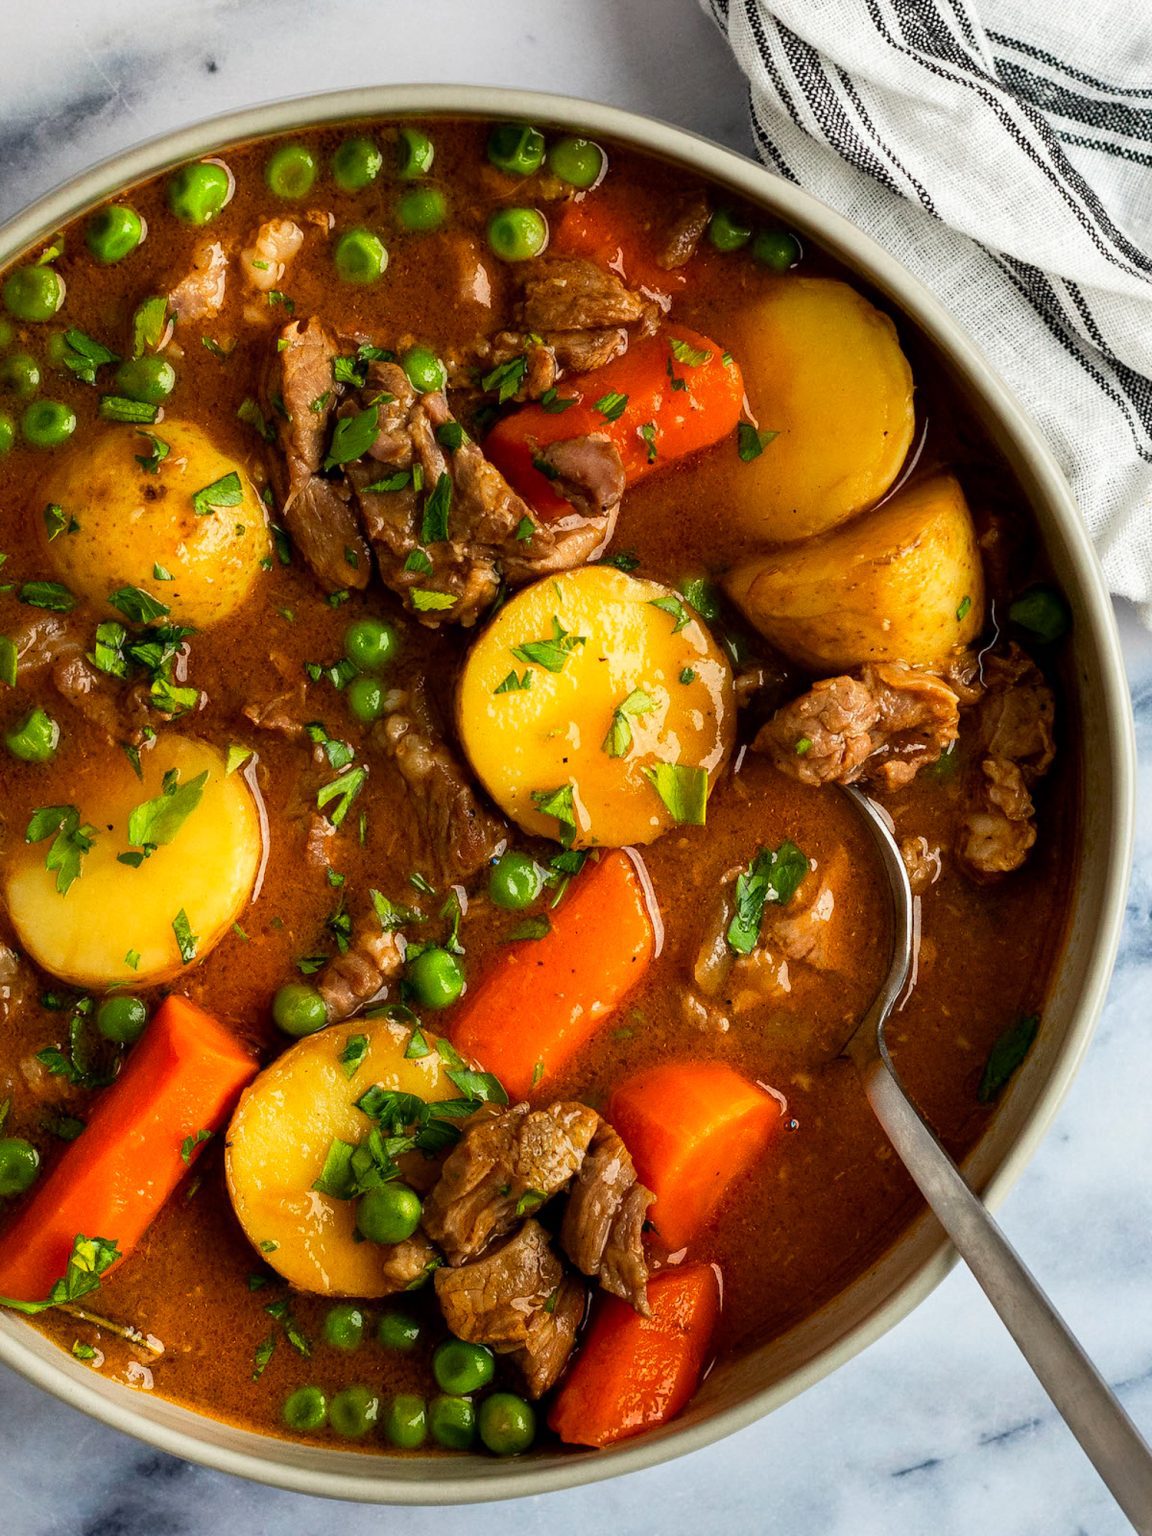 Lamb Stew with Vegetables - Once Upon a Chef